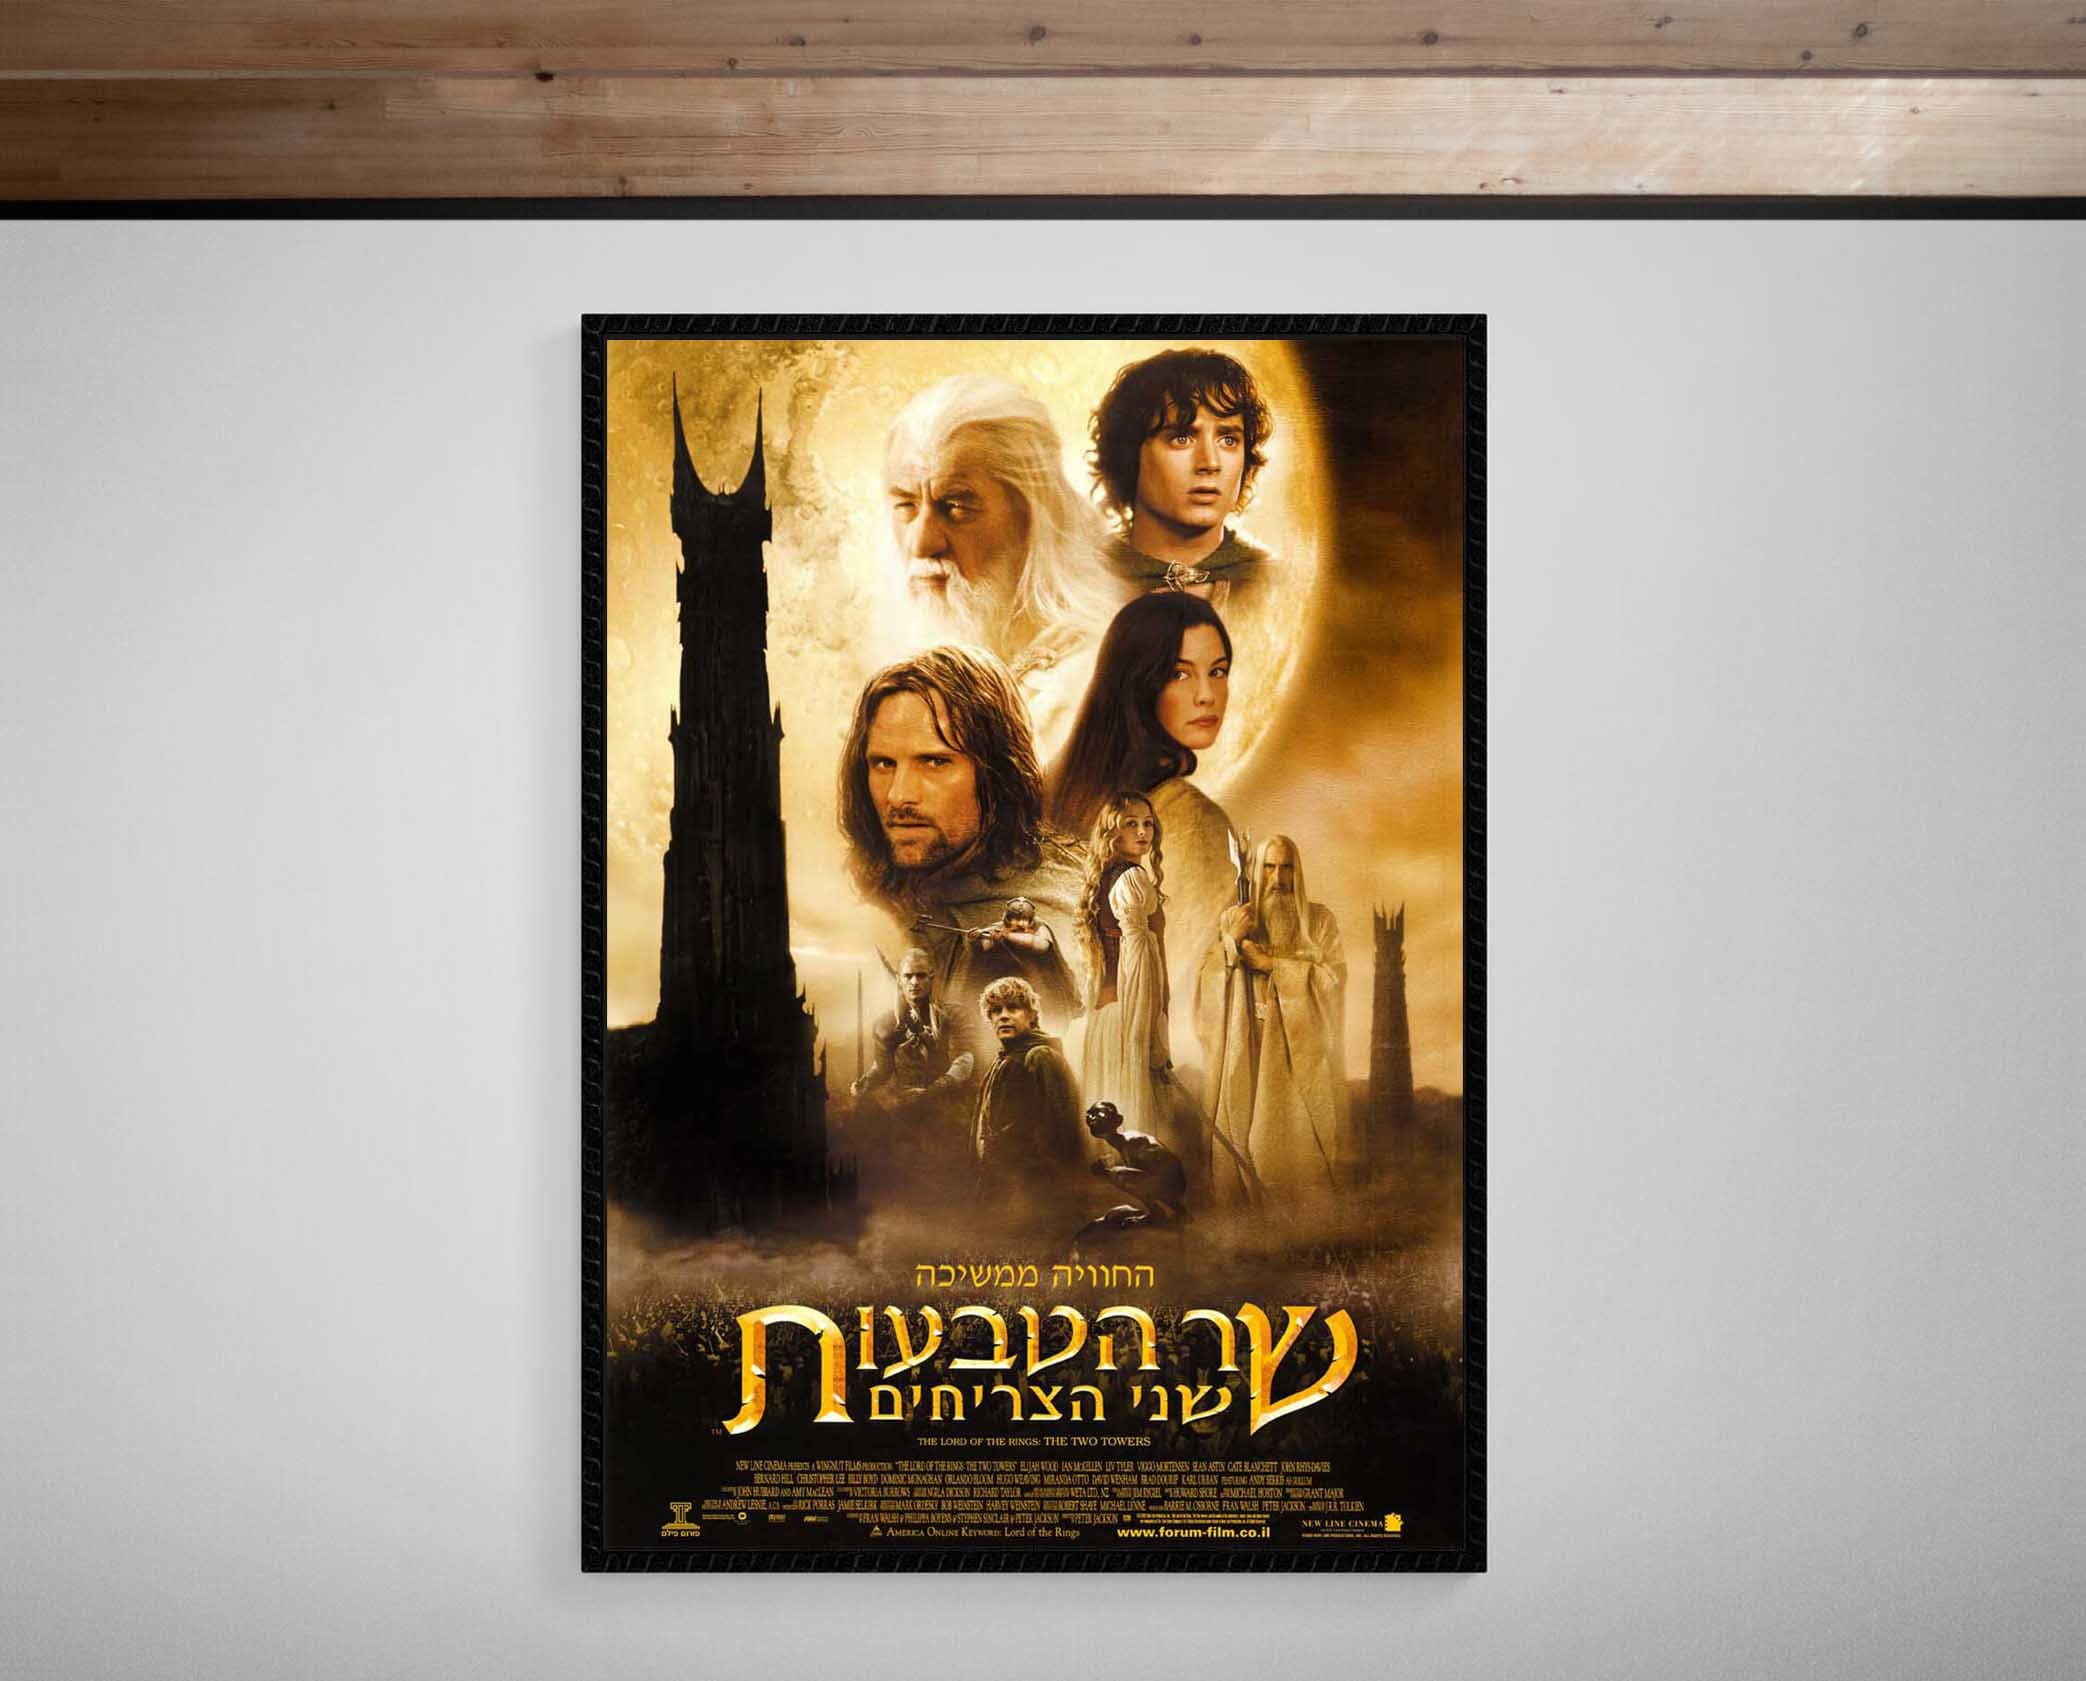 The Lord of the Rings: The Two Towers (2002) One-Sheet Movie Poster -  Original Film Art - Vintage Movie Posters